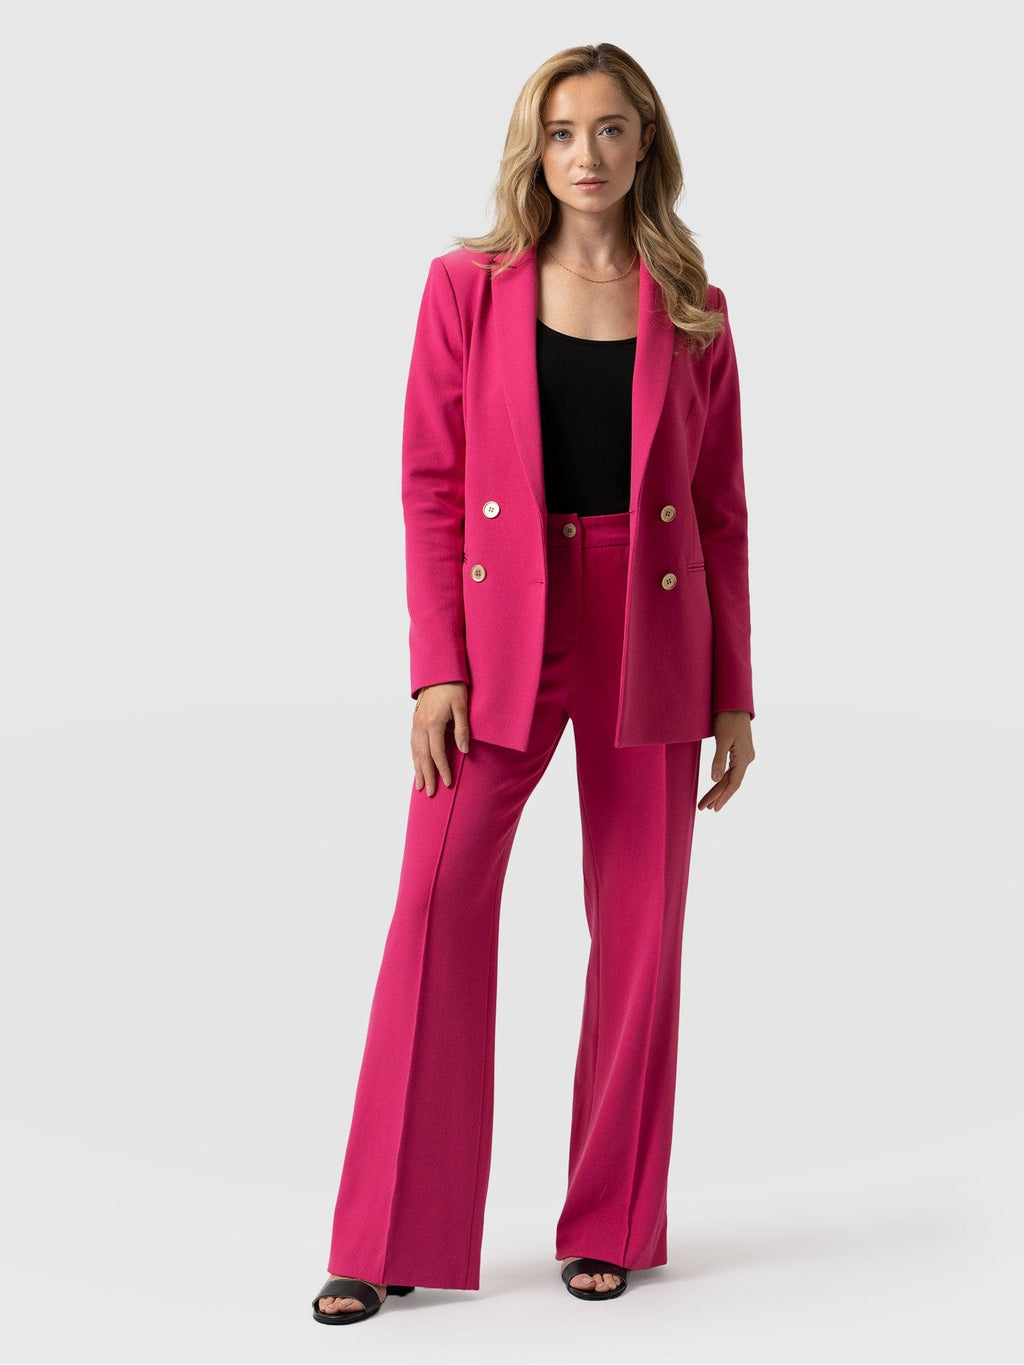 Cambridge Tailored Wide Leg Pant Hot Pink - Women's Trousers